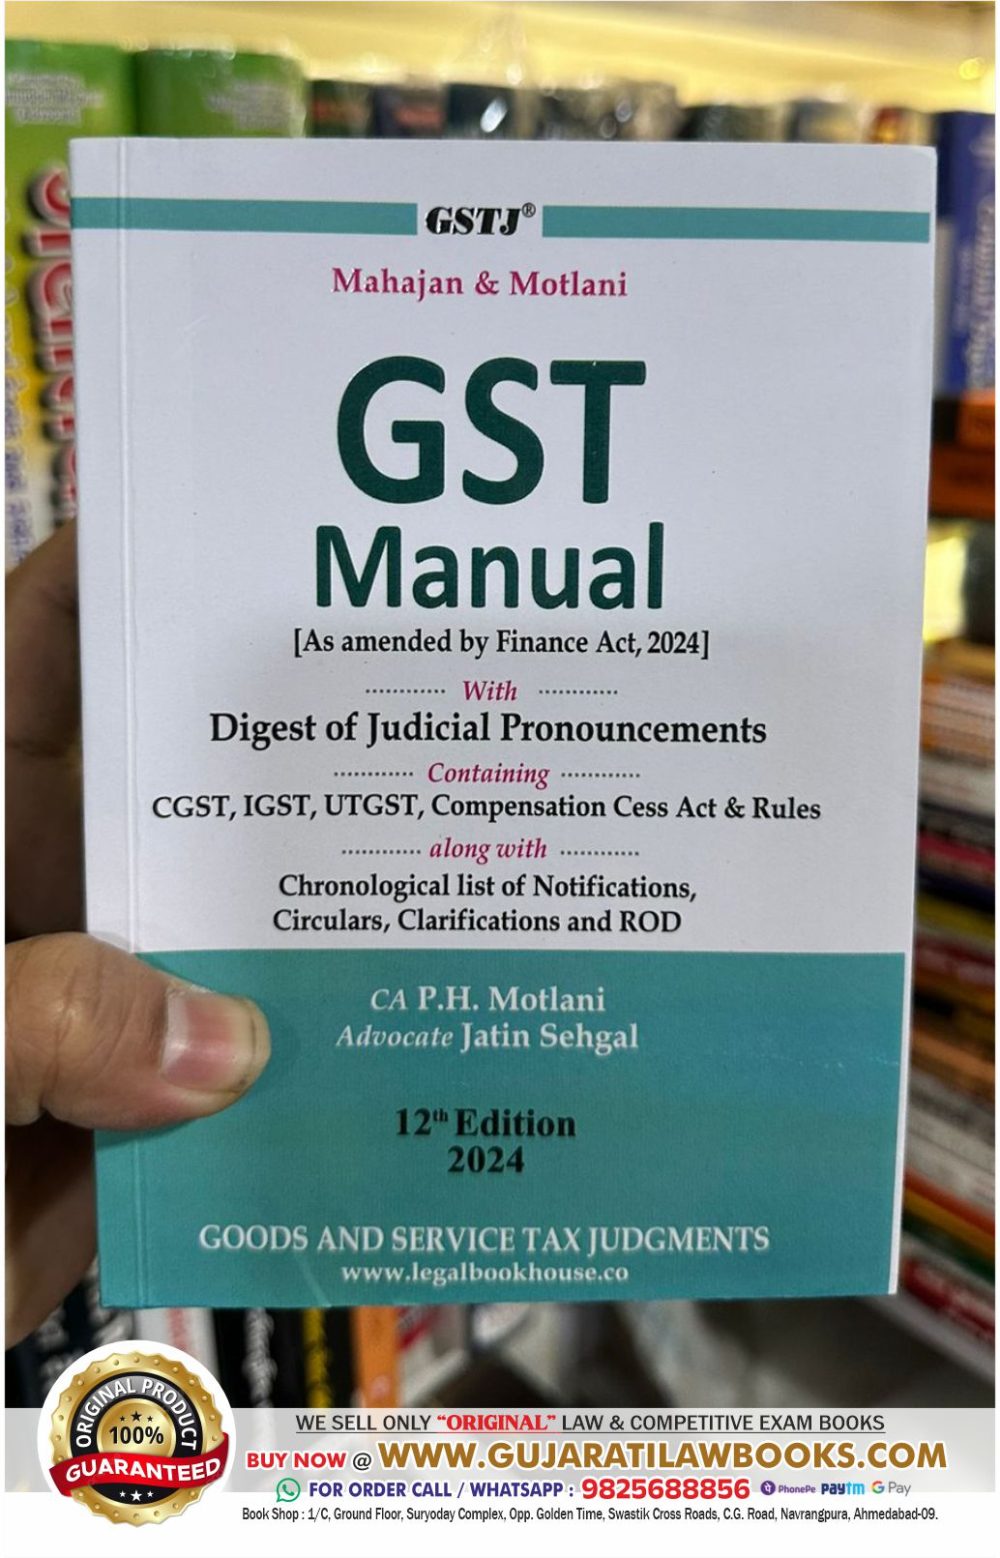 GST MANUAL - Latest 12th Edition 2024 by CA P H Motlani & Advocate Jatin Sehgal by Goods and Service Tax Judgement